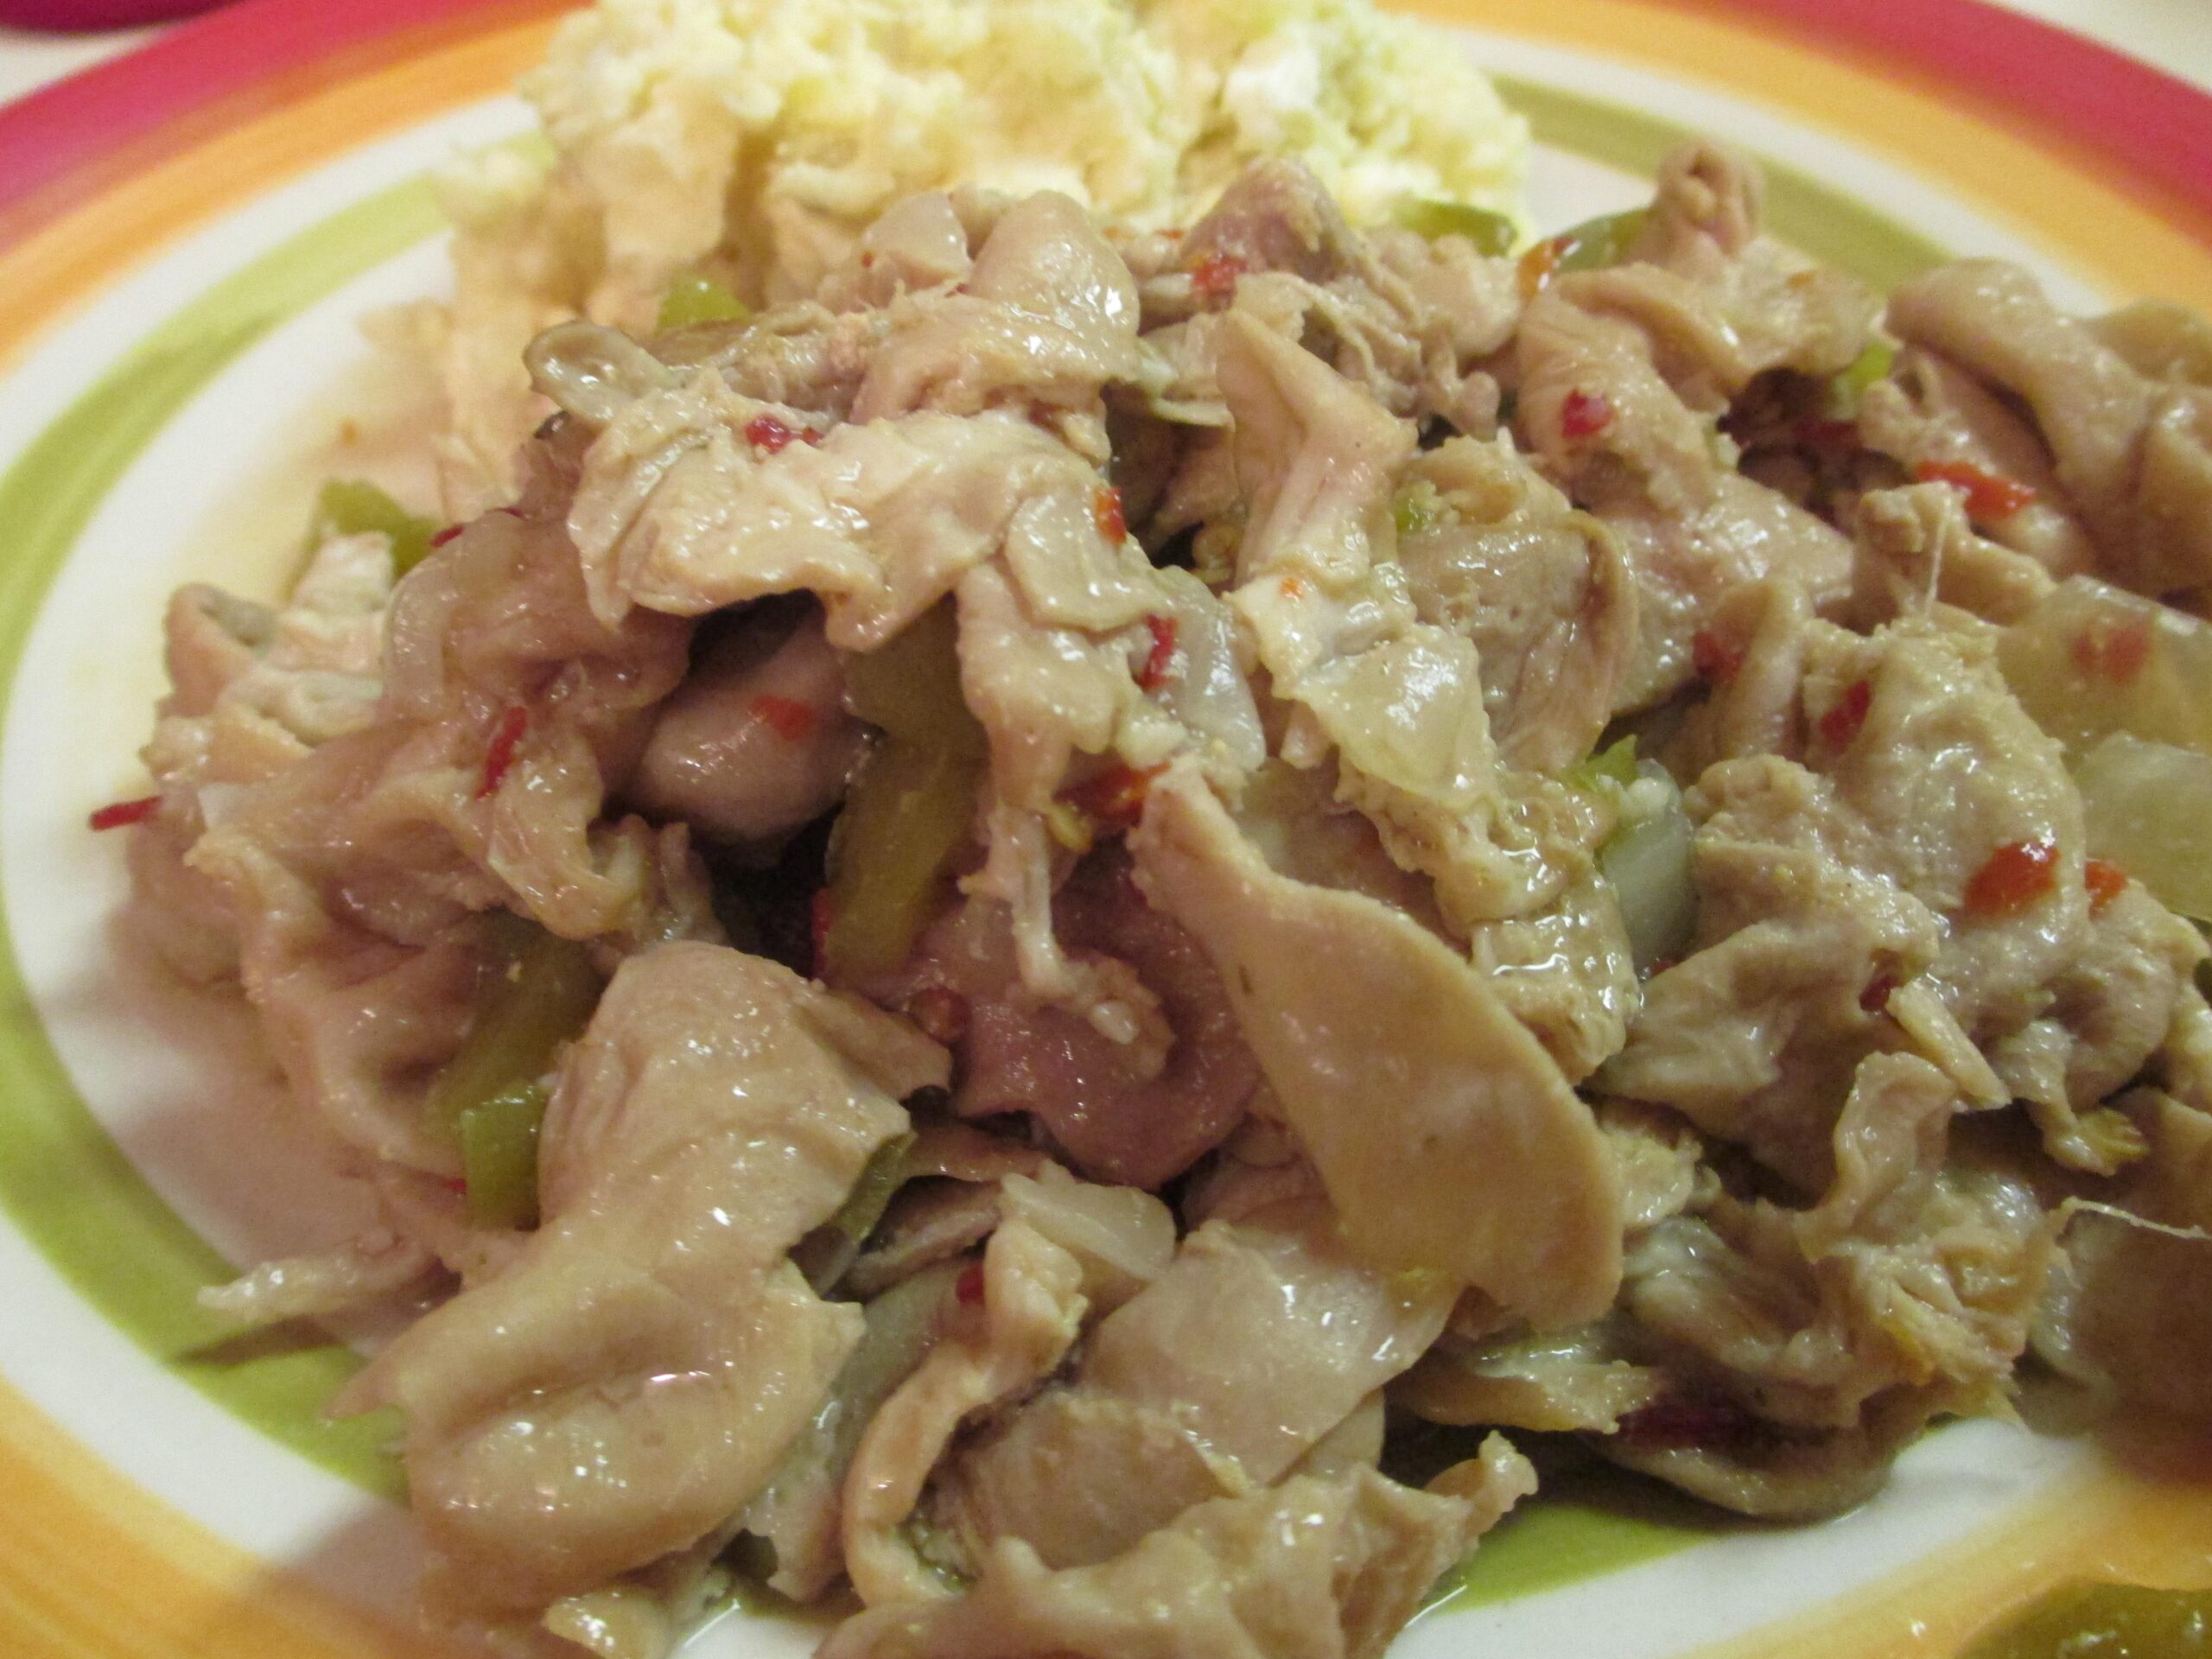  These hot and spicy chitterlings will send your taste buds on a wild ride.